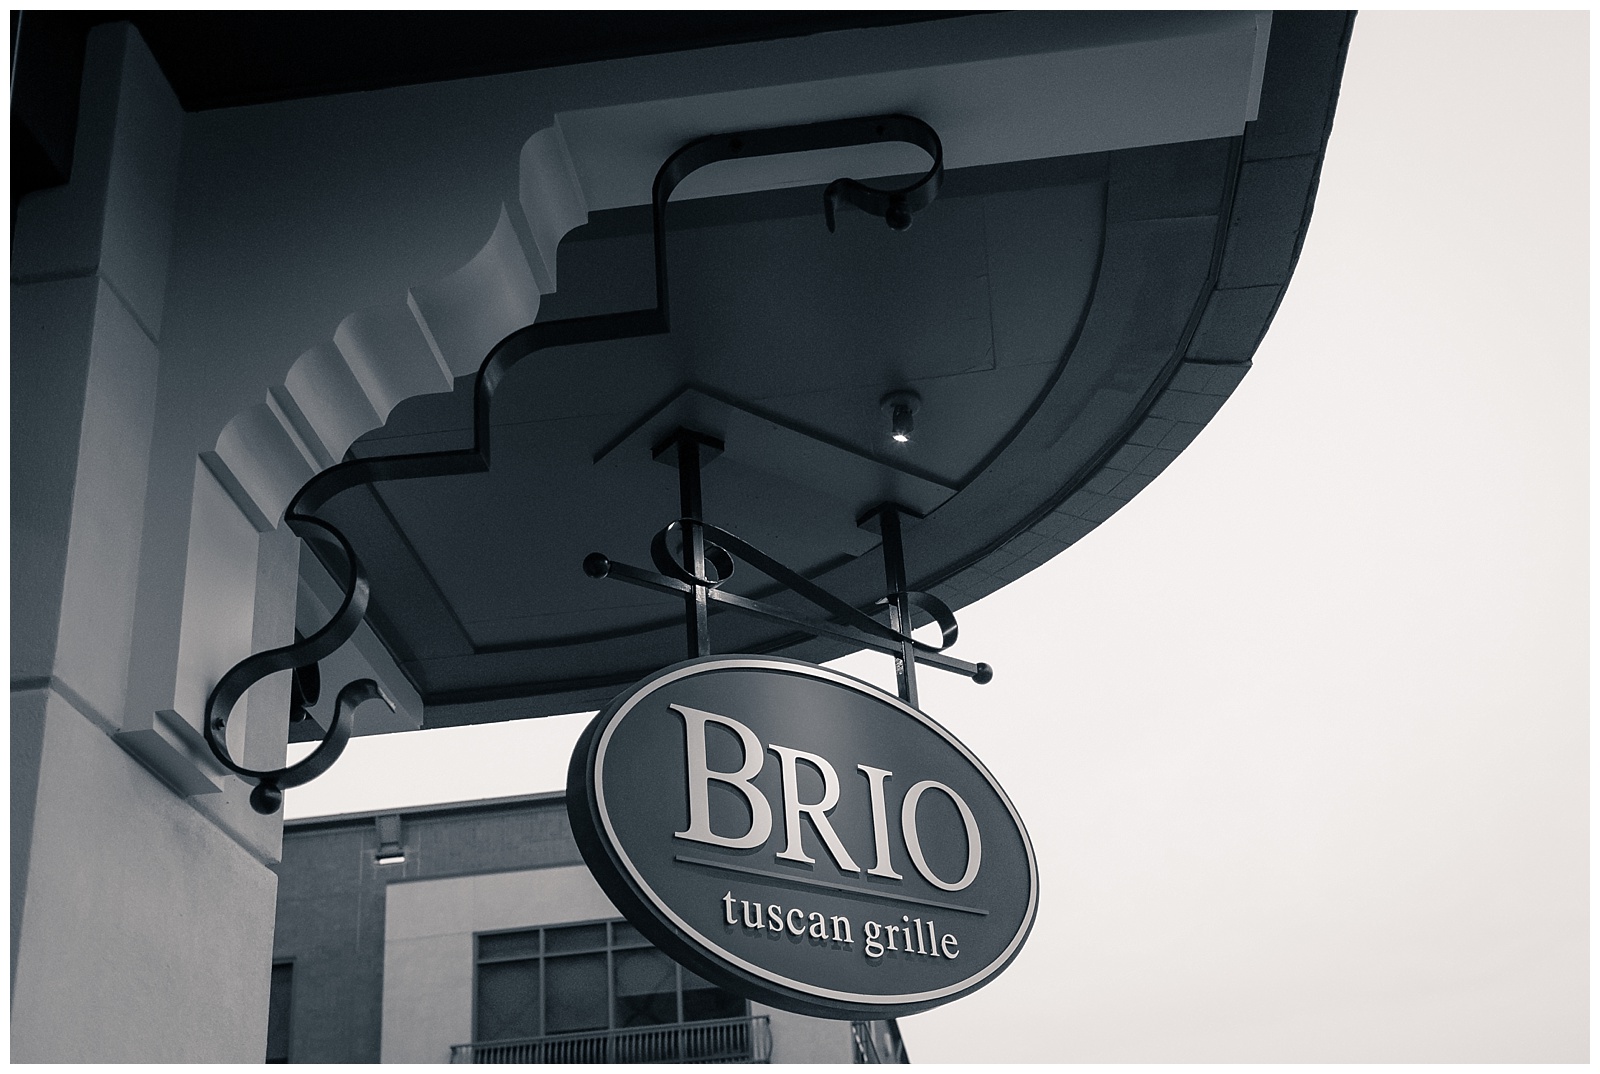 Wedding photography at Brio Tuscan Grille in Kansas City.